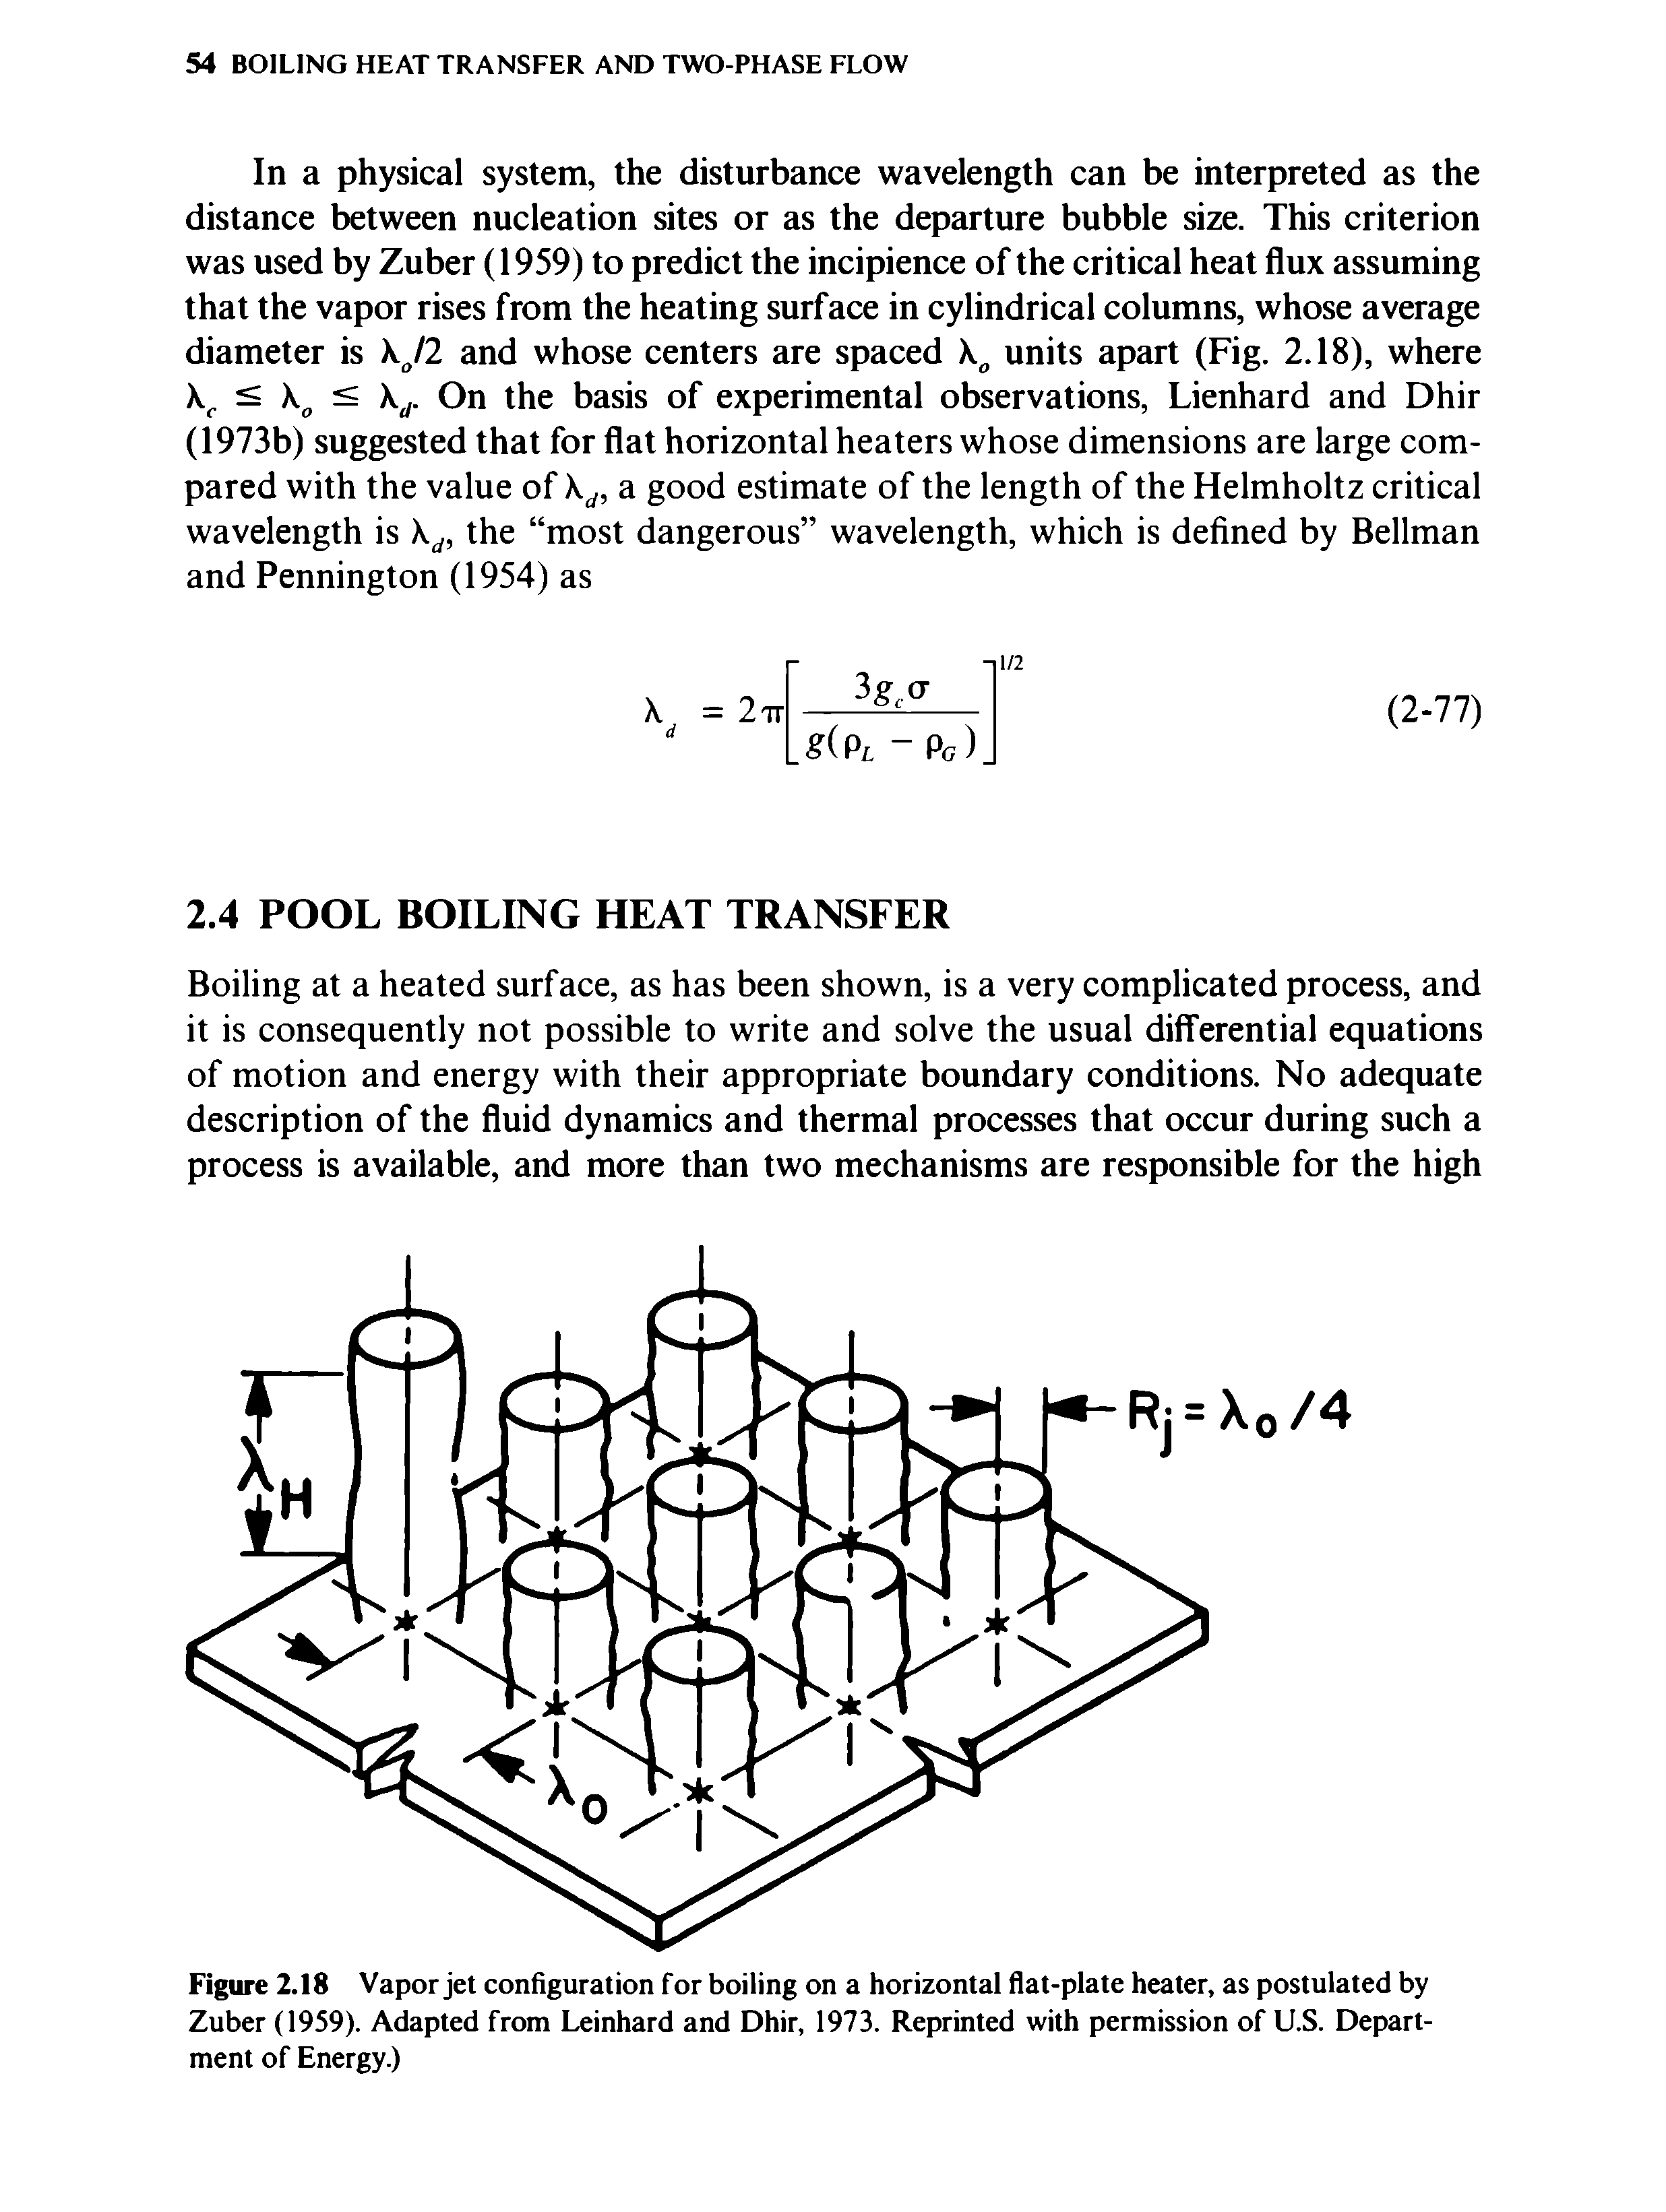 Figure 2.18 Vapor jet configuration f or boiling on a horizontal flat-plate heater, as postulated by Zuber (1959). Adapted from Leinhard and Dhir, 1973. Reprinted with permission of U.S. Department of Energy.)...